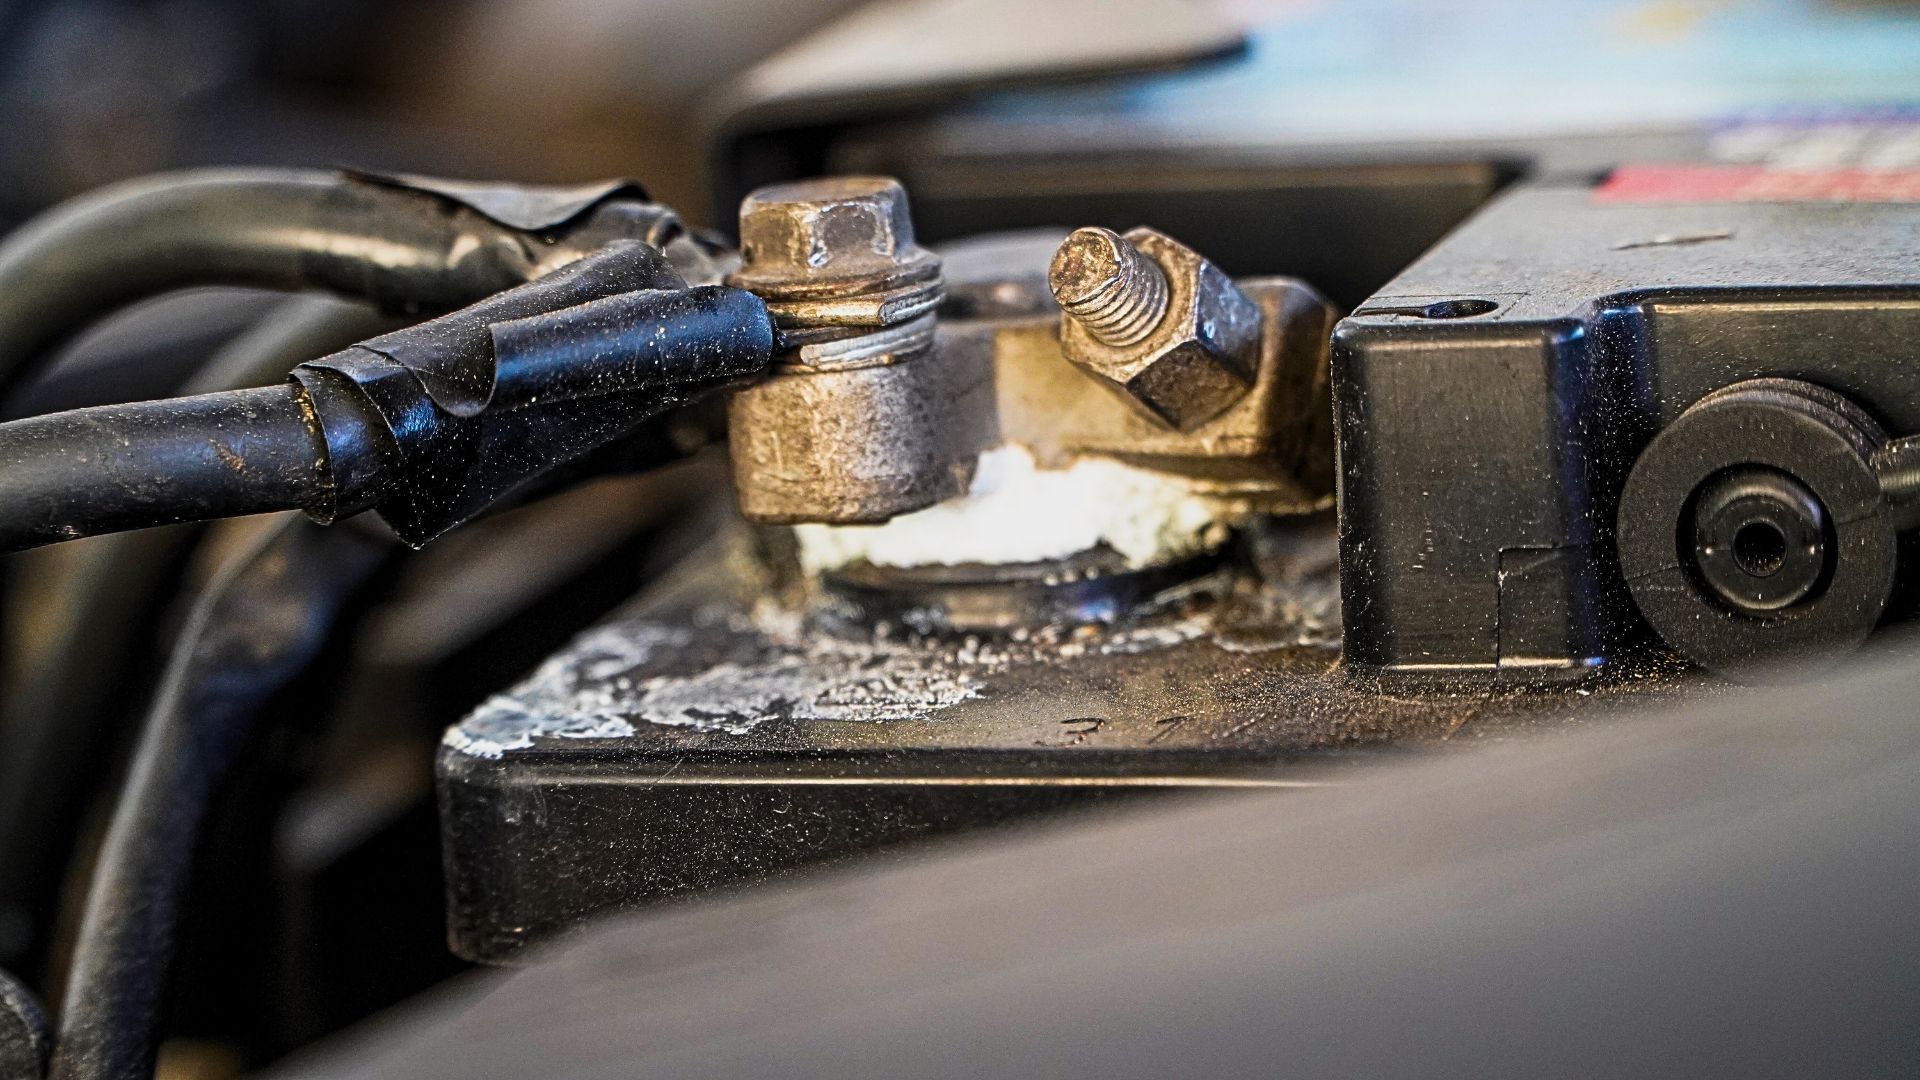 How to clean car battery terminals